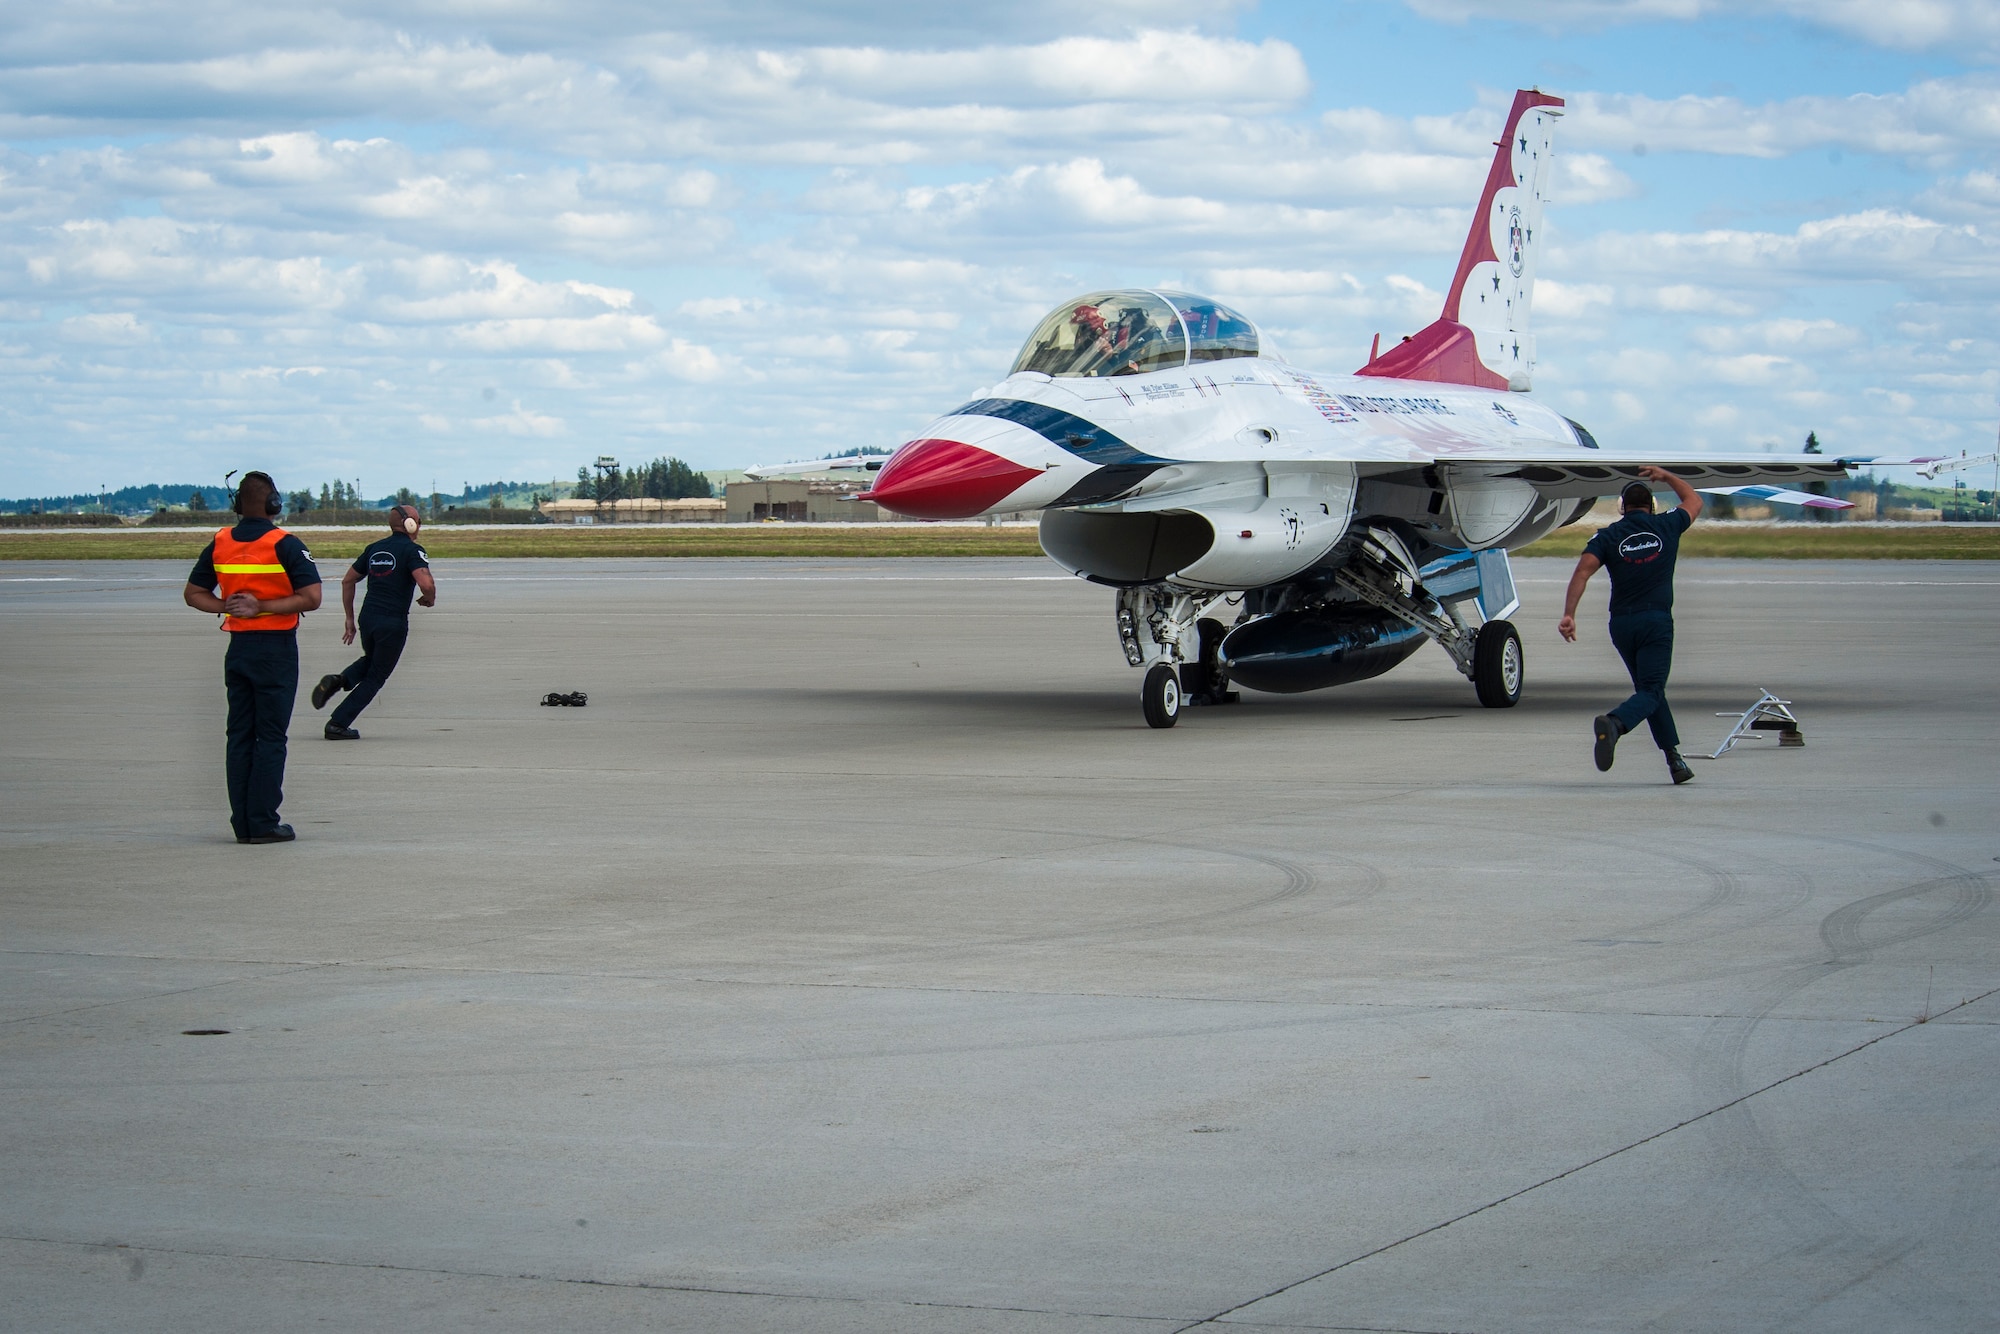 Crew chiefs prepare a U.S. Air Force Thunderbird with orientation flight rider, Leslie Lowe, for takeoff as part of SkyFest 2014 at Fairchild Air Force Base, Wash., May 29, 2014. The Thunderbirds is an Air Combat Command unit composed of eight pilots, including six demonstration pilots, four support officers, three civilians and more than 130 enlisted personnel performing in 25 career fields. SkyFest is Fairchild’s air show and open house, giving the local and regional community the opportunity to view Airmen and our resources. Lowe is a KHQ 6 reporter. (U.S. Air Force photo by Staff Sgt. Benjamin W. Stratton/Released)